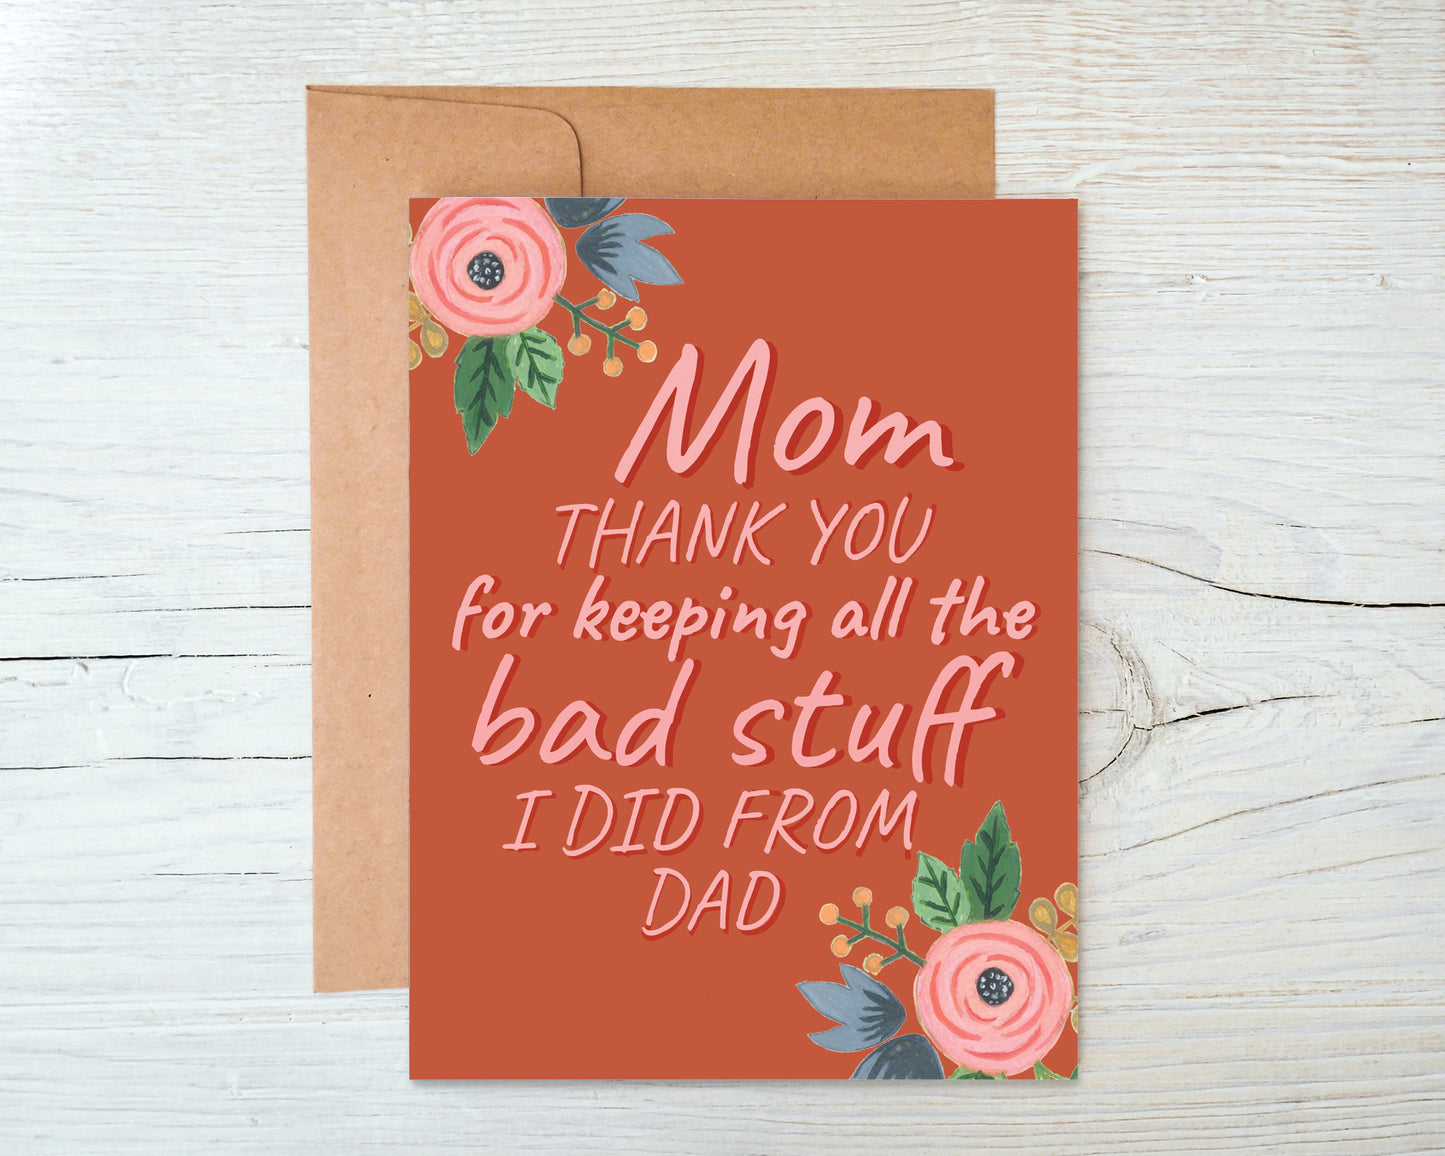 Mother's Day Cards, Floral Mothers Day Card, Card for Mom, Funny Mum Card, Card from Daughter, Item Code - COTC M16